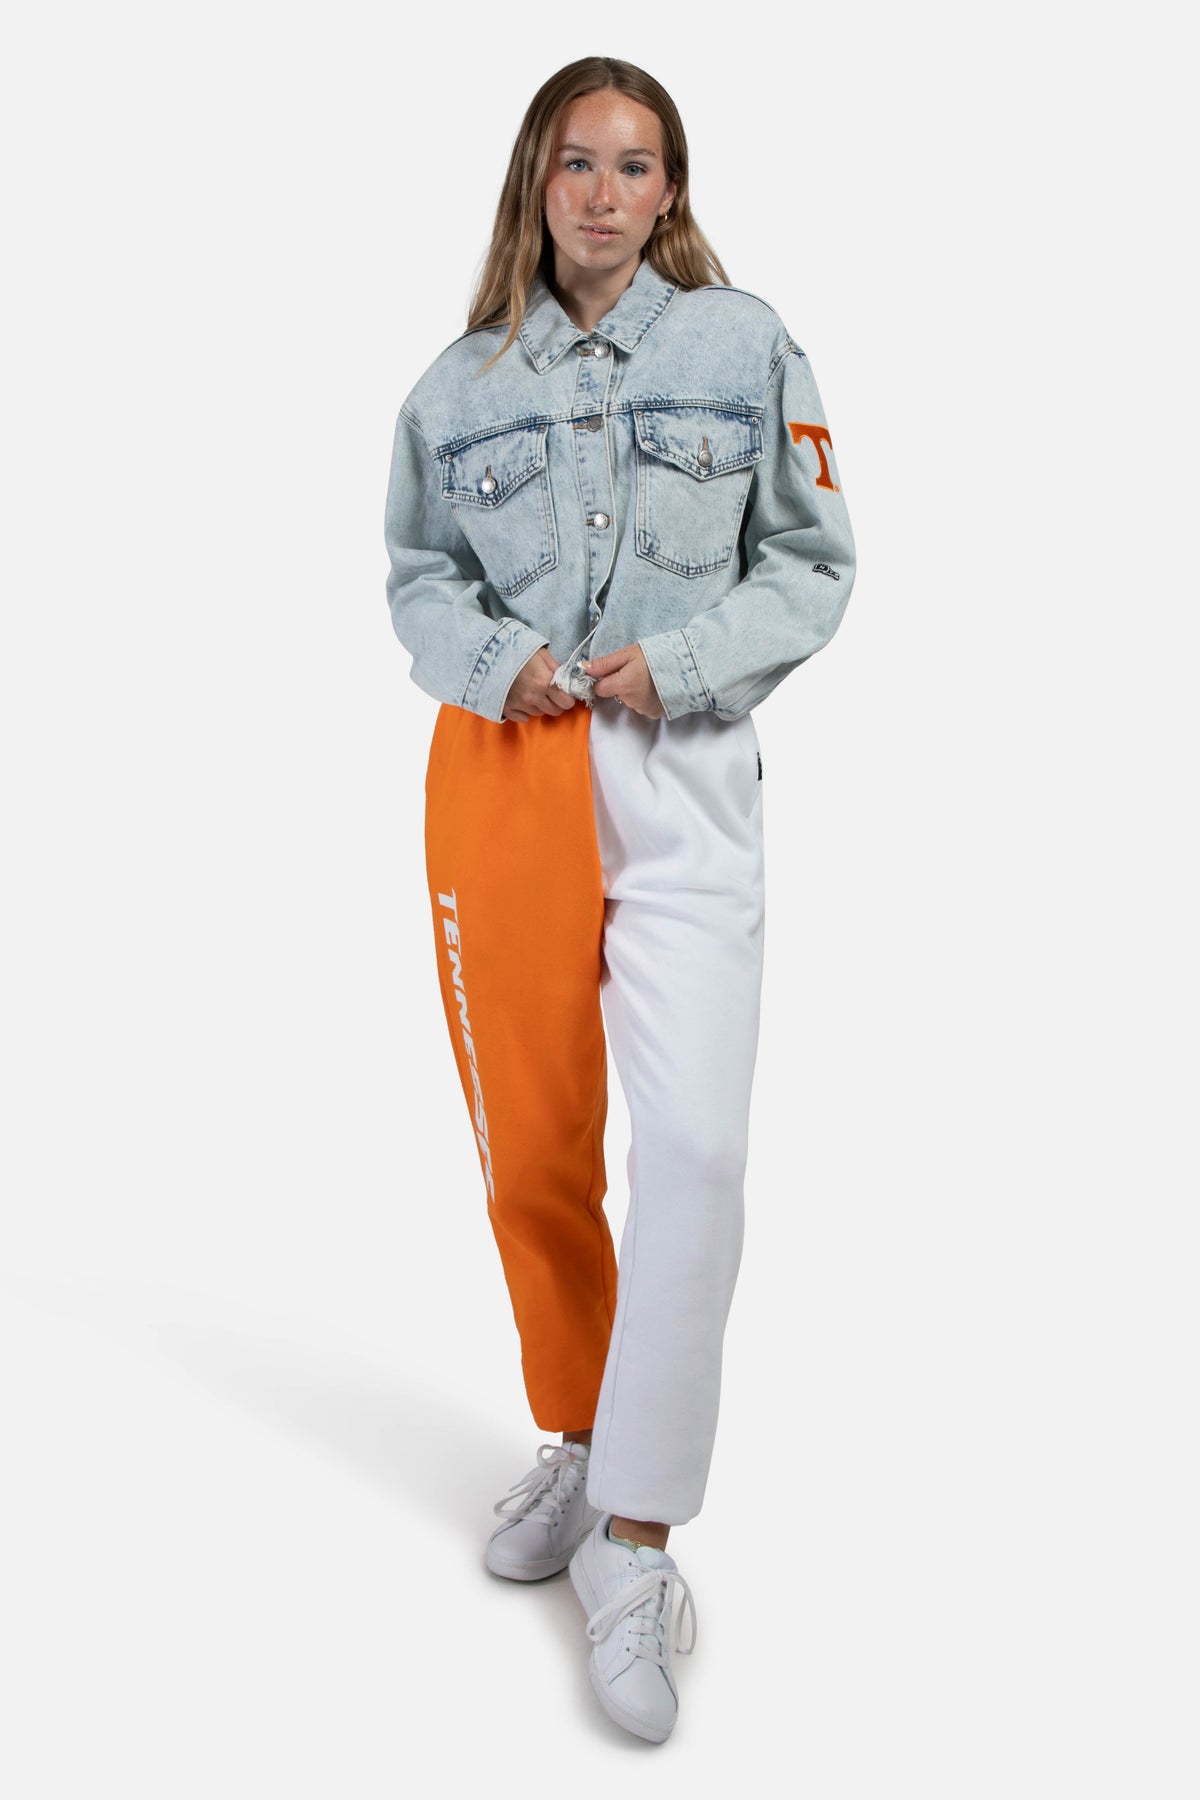 University of Tennessee Color-Block Sweats